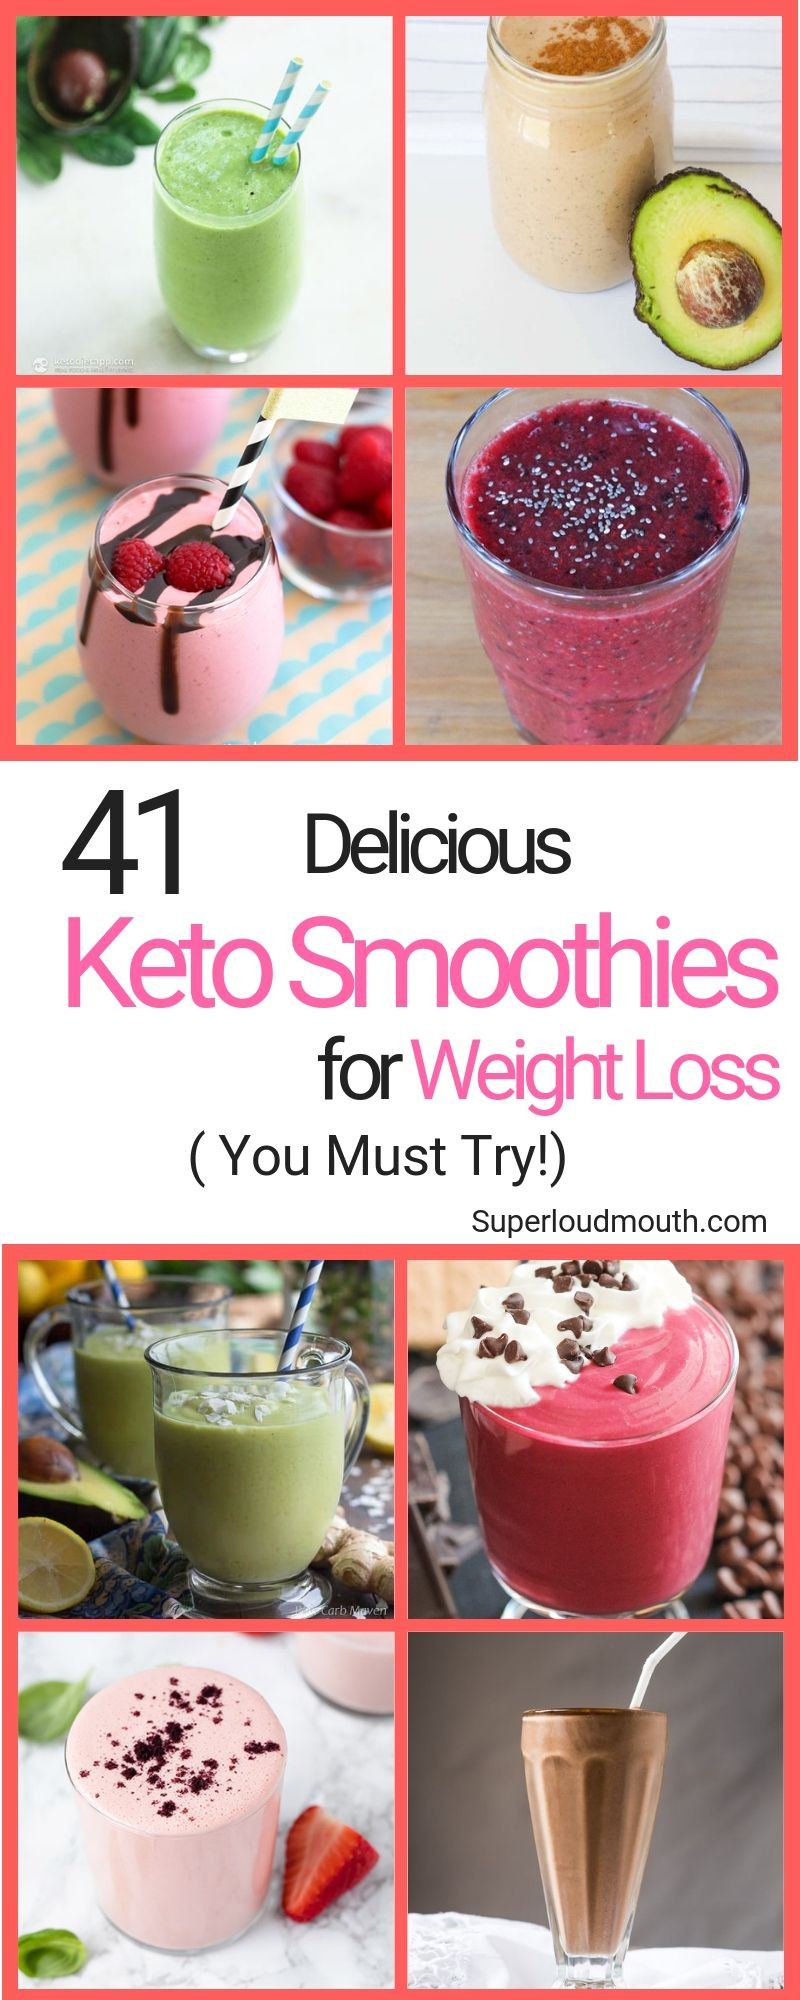 Keto Diet For Beginners Losing Weight Smoothies
 101 Healthy Keto Smoothies Soups and Shakes Recipes for